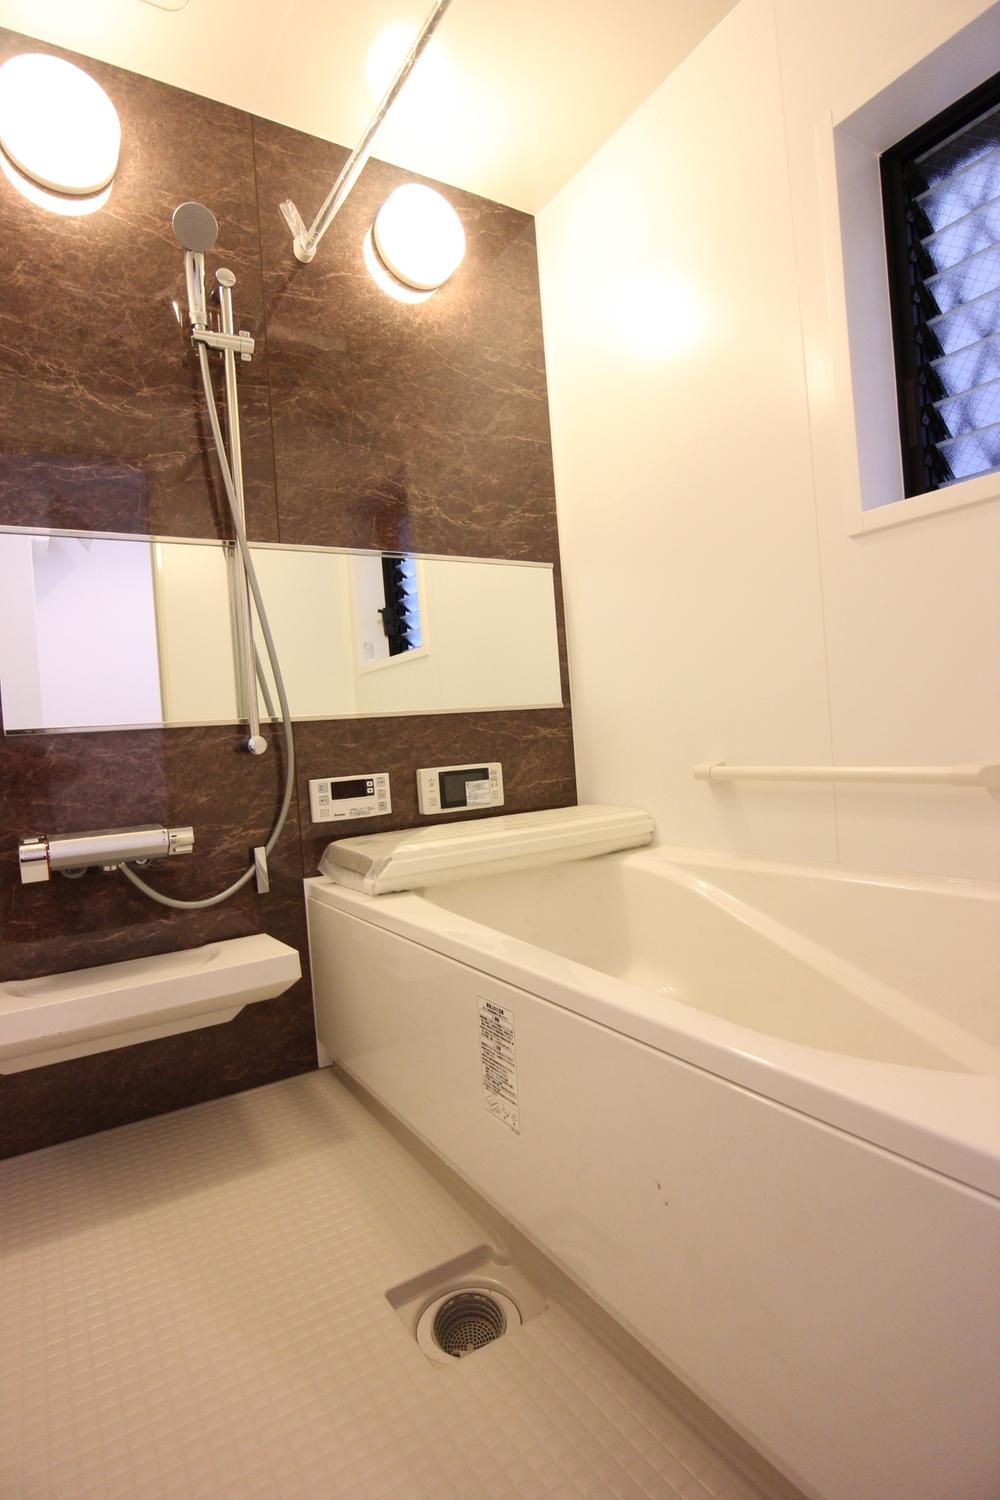 Bathroom. With Waterproof LCD TV! TV you can see while taking a bath!